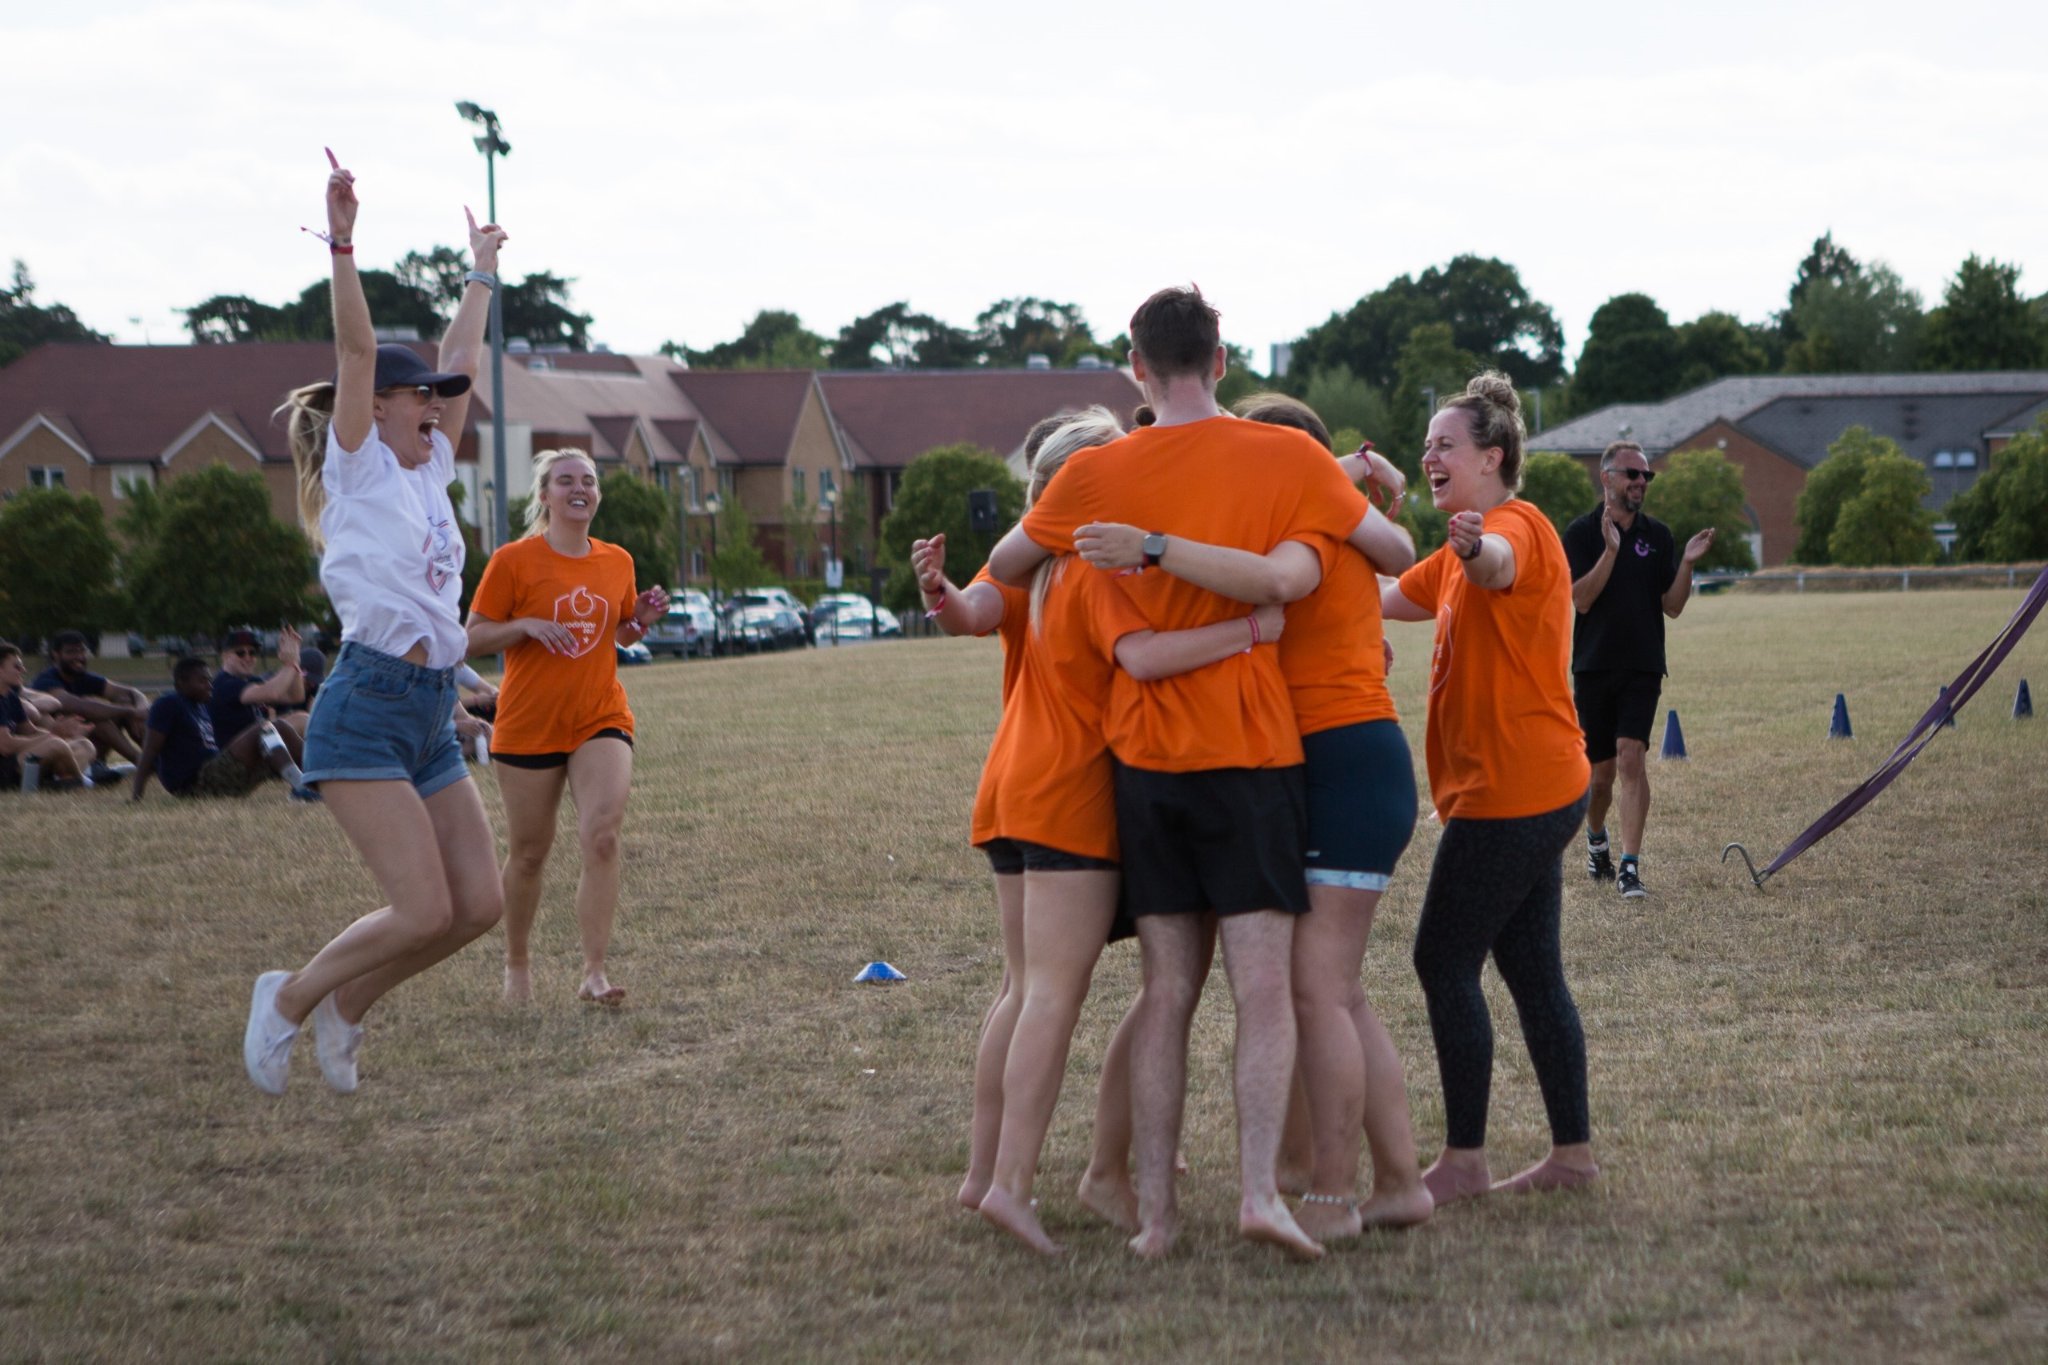 A team of people in orange shirts hugging after a sports win